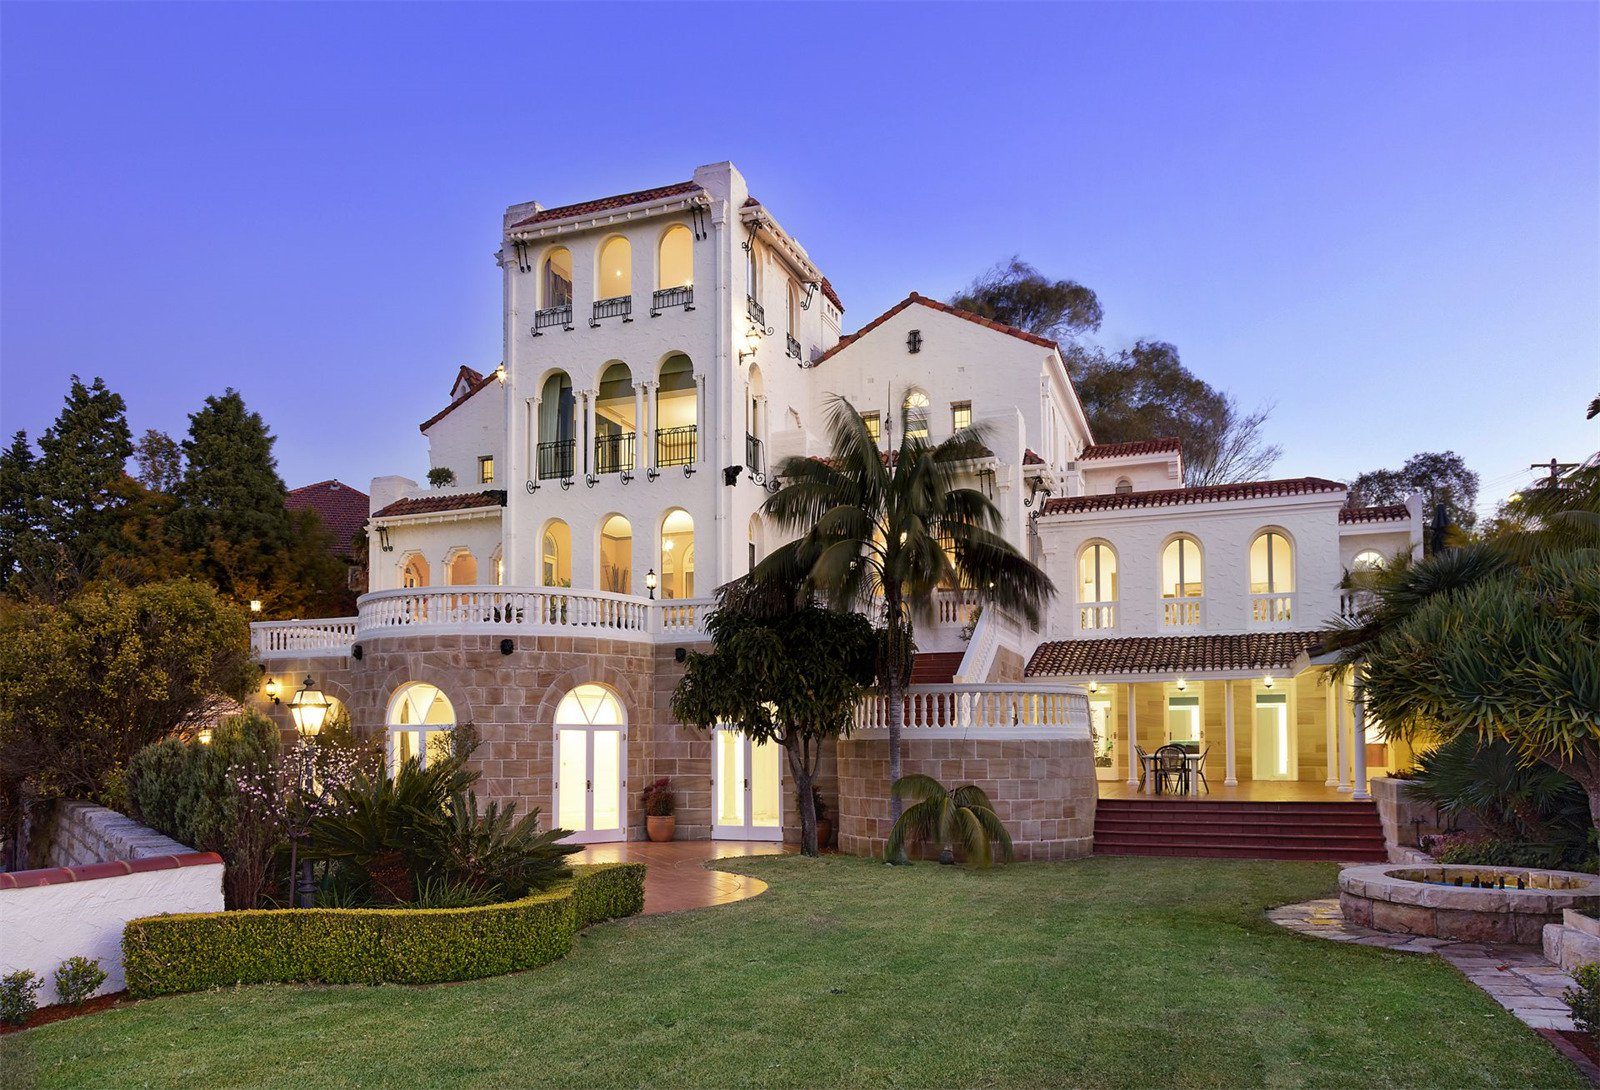 Spanish mission style estate located in New South Wales Australia